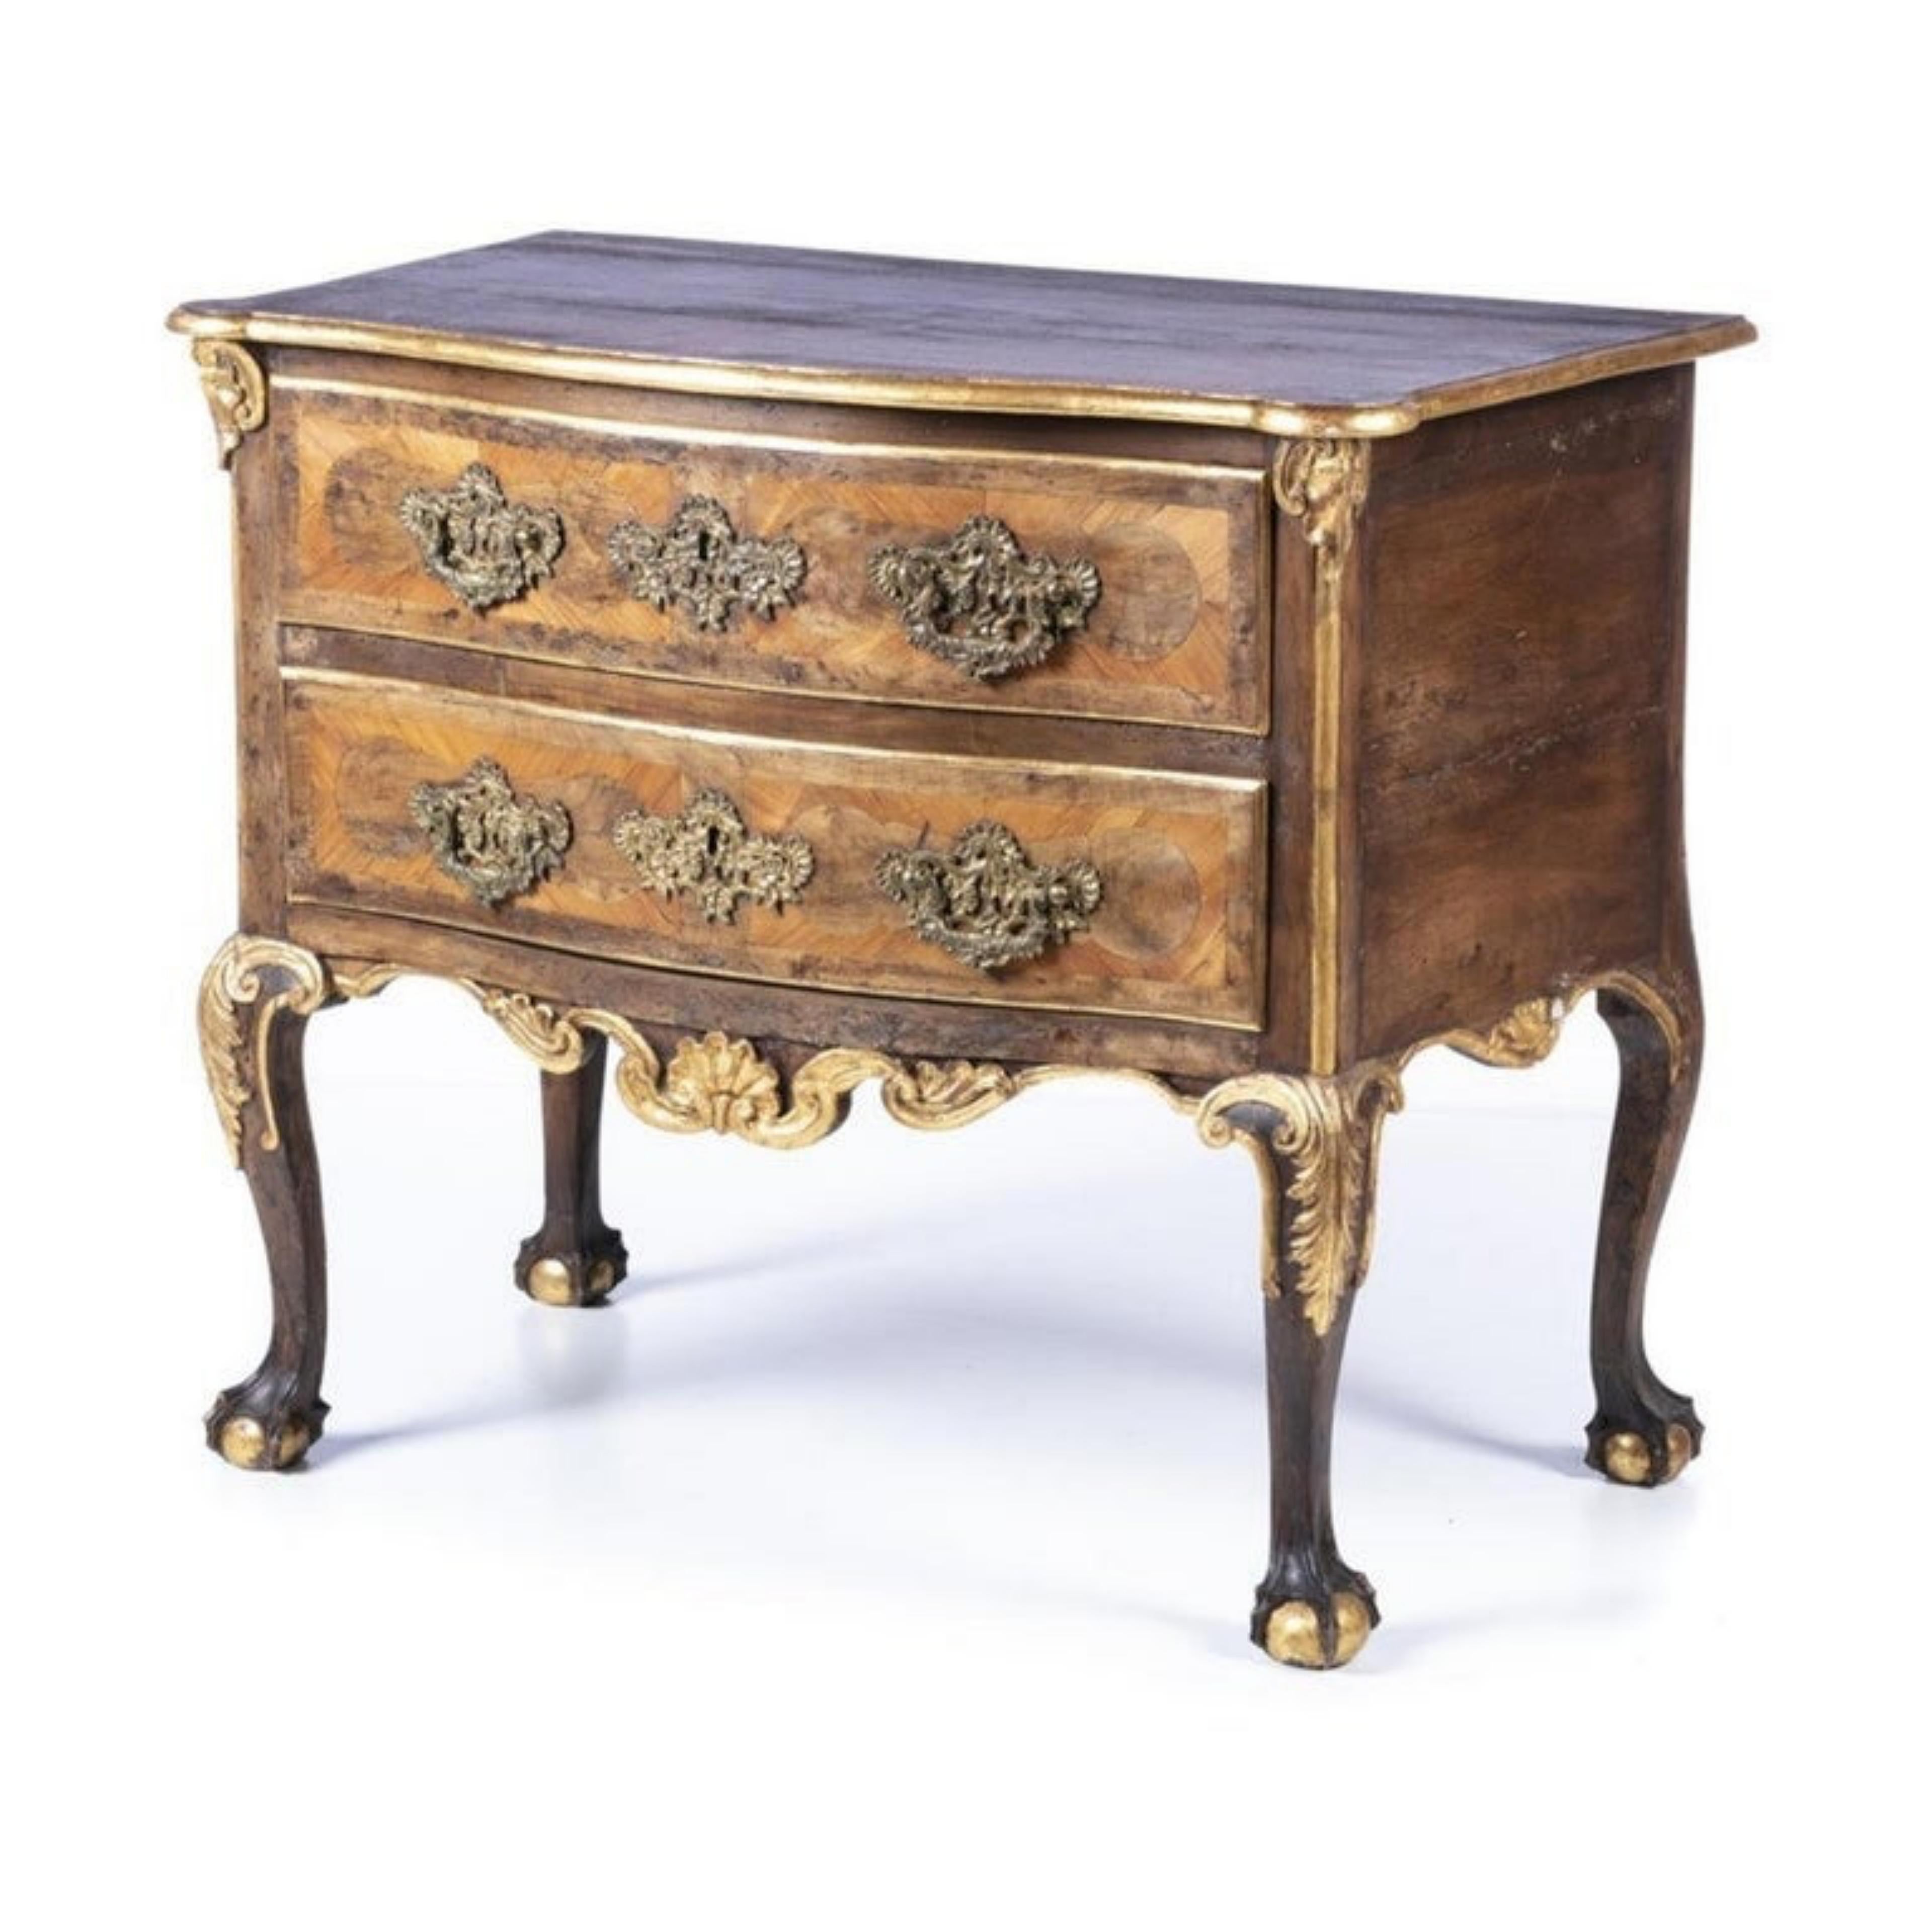 Portuguese dresser 18th century

in carved walnut wood and plated with other woods, with gilding. Box with two drawers and scalloped skirt, decorated with shell motifs and plant motifs. 
Stands on four feet in the shape of a claw and ball. 
Brass